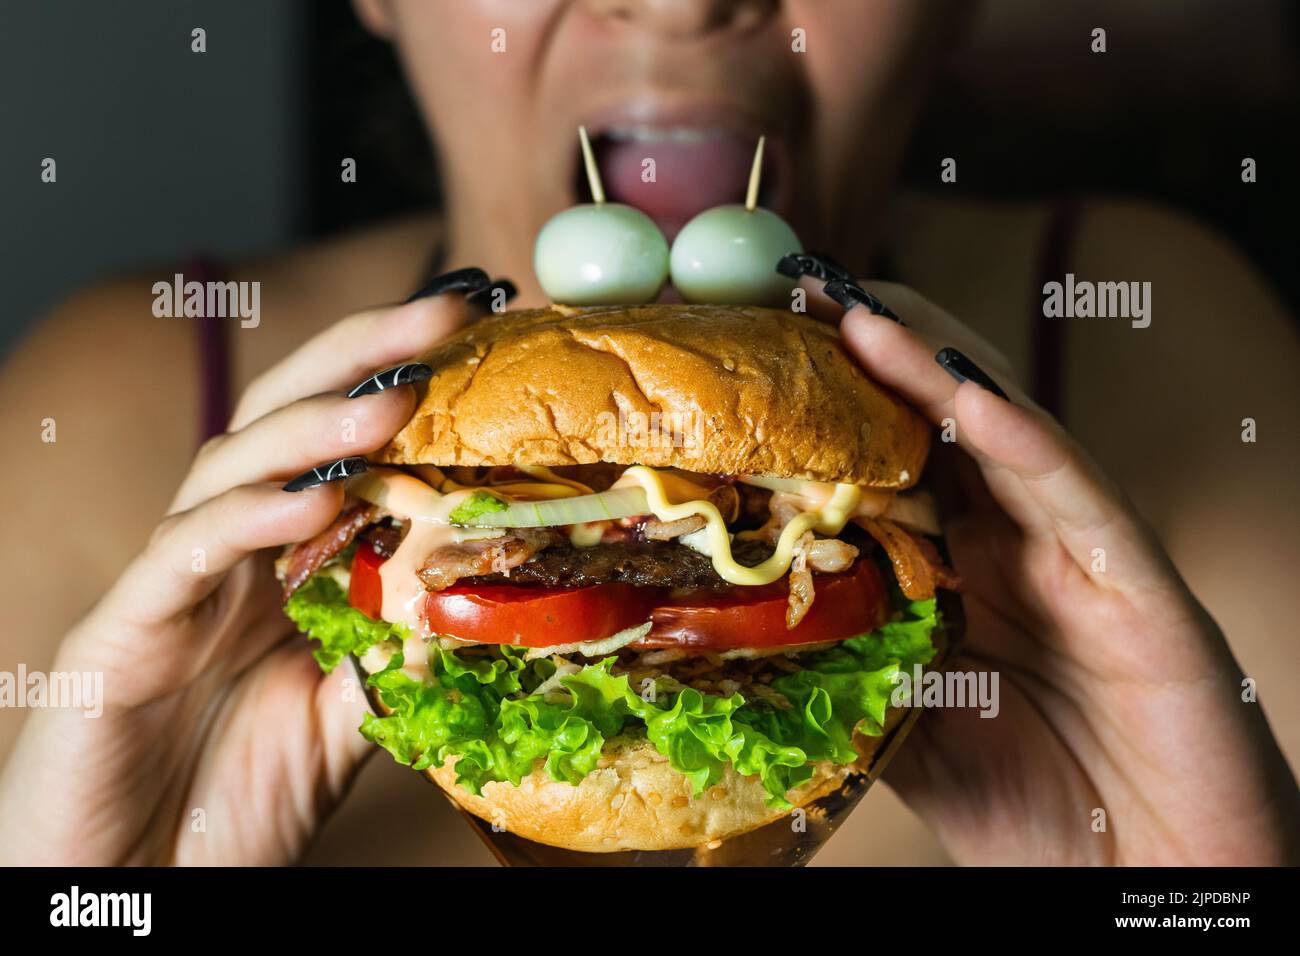 latina girl about to bite a hamburger she is holding with both hands. hamburger with two quail eggs on top imitating eyes. street food on black backgr Stock Photo